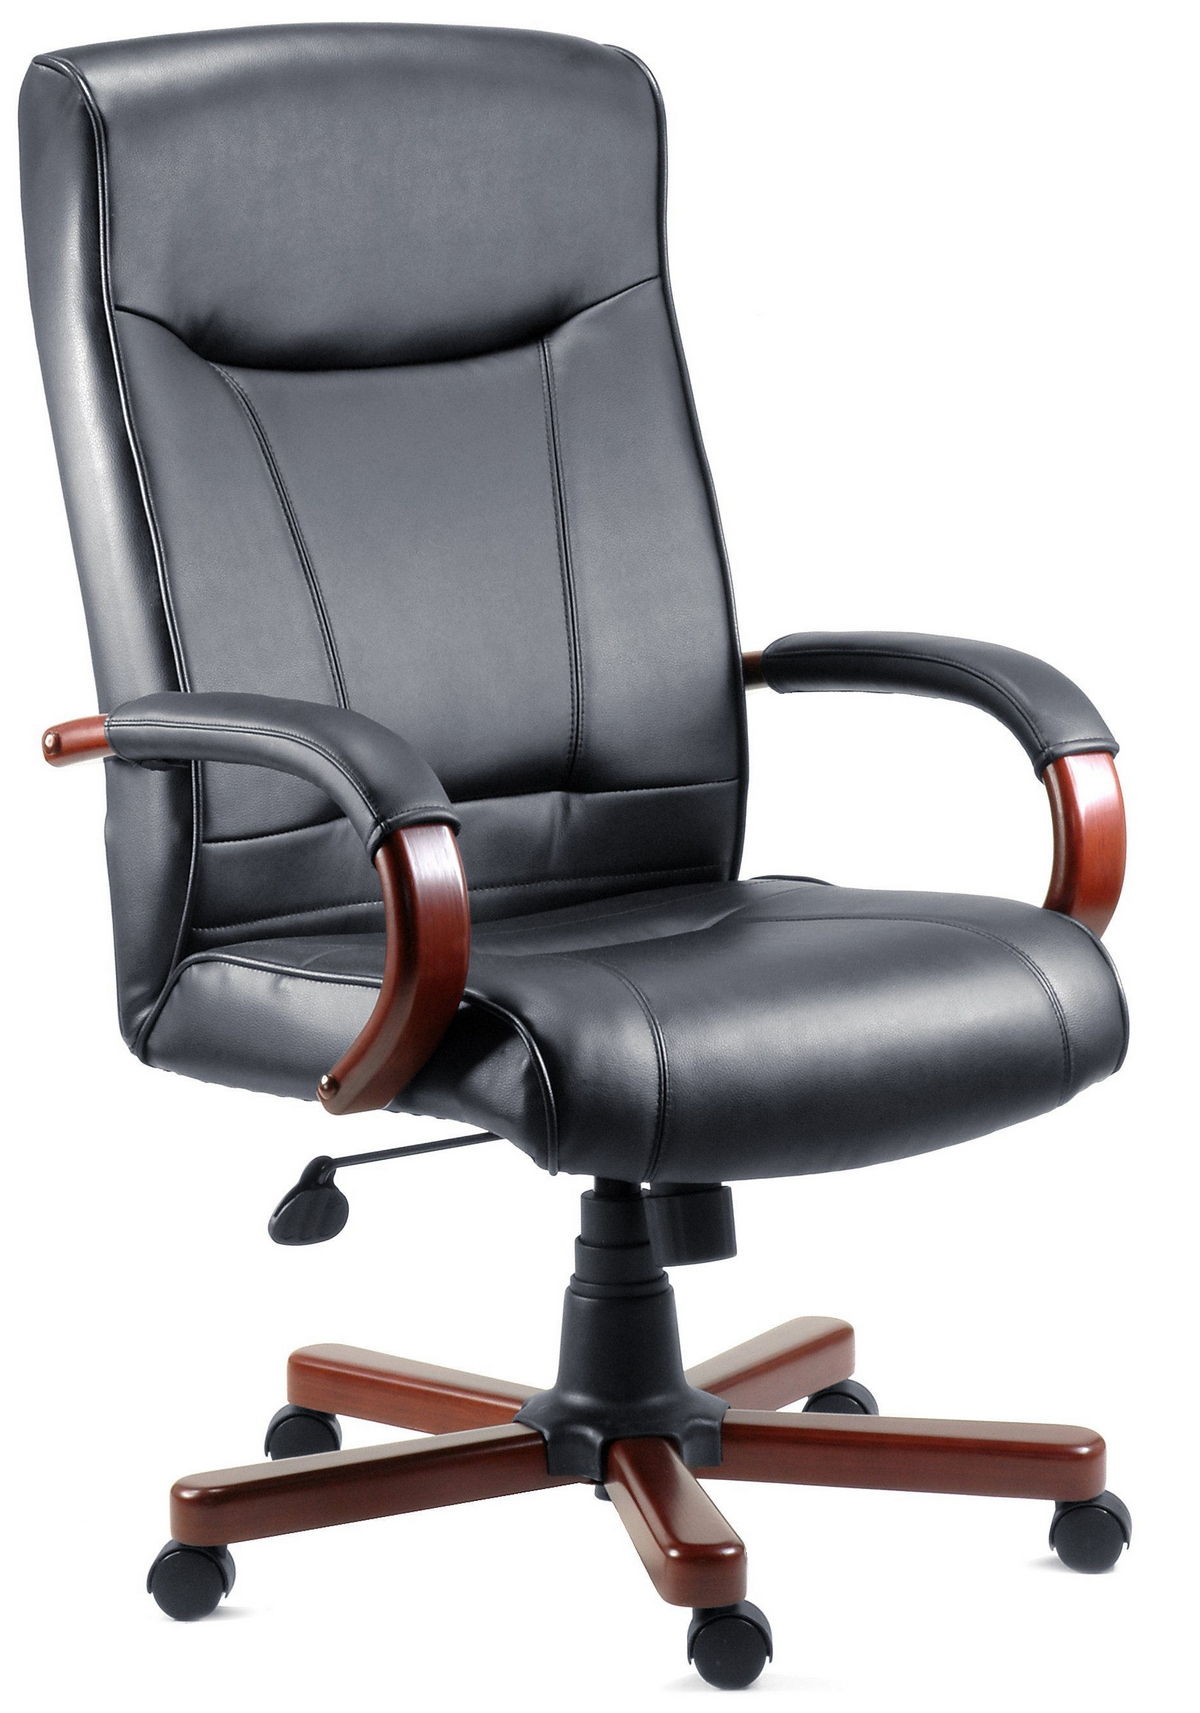 Kingslow Dark Wood Office Chair Executive Bonded Leather Faced